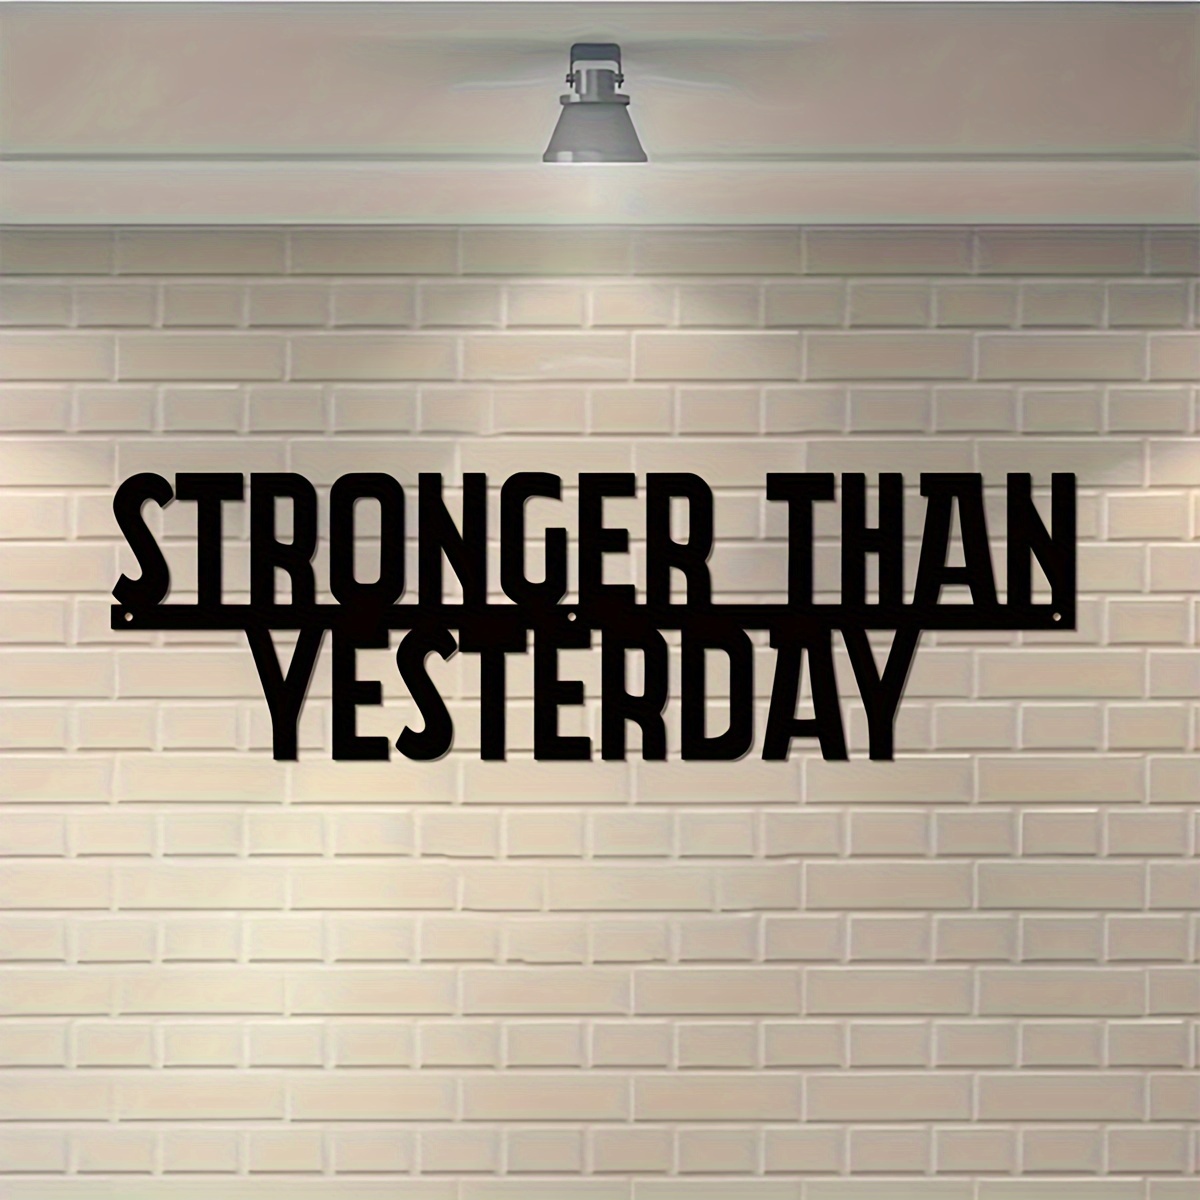 

1pc Stronger Than Yesterday - Motivational Metal Quote Sign - Workout Inspiration - Home Gym Decor - Workout Wall Art - Gifts